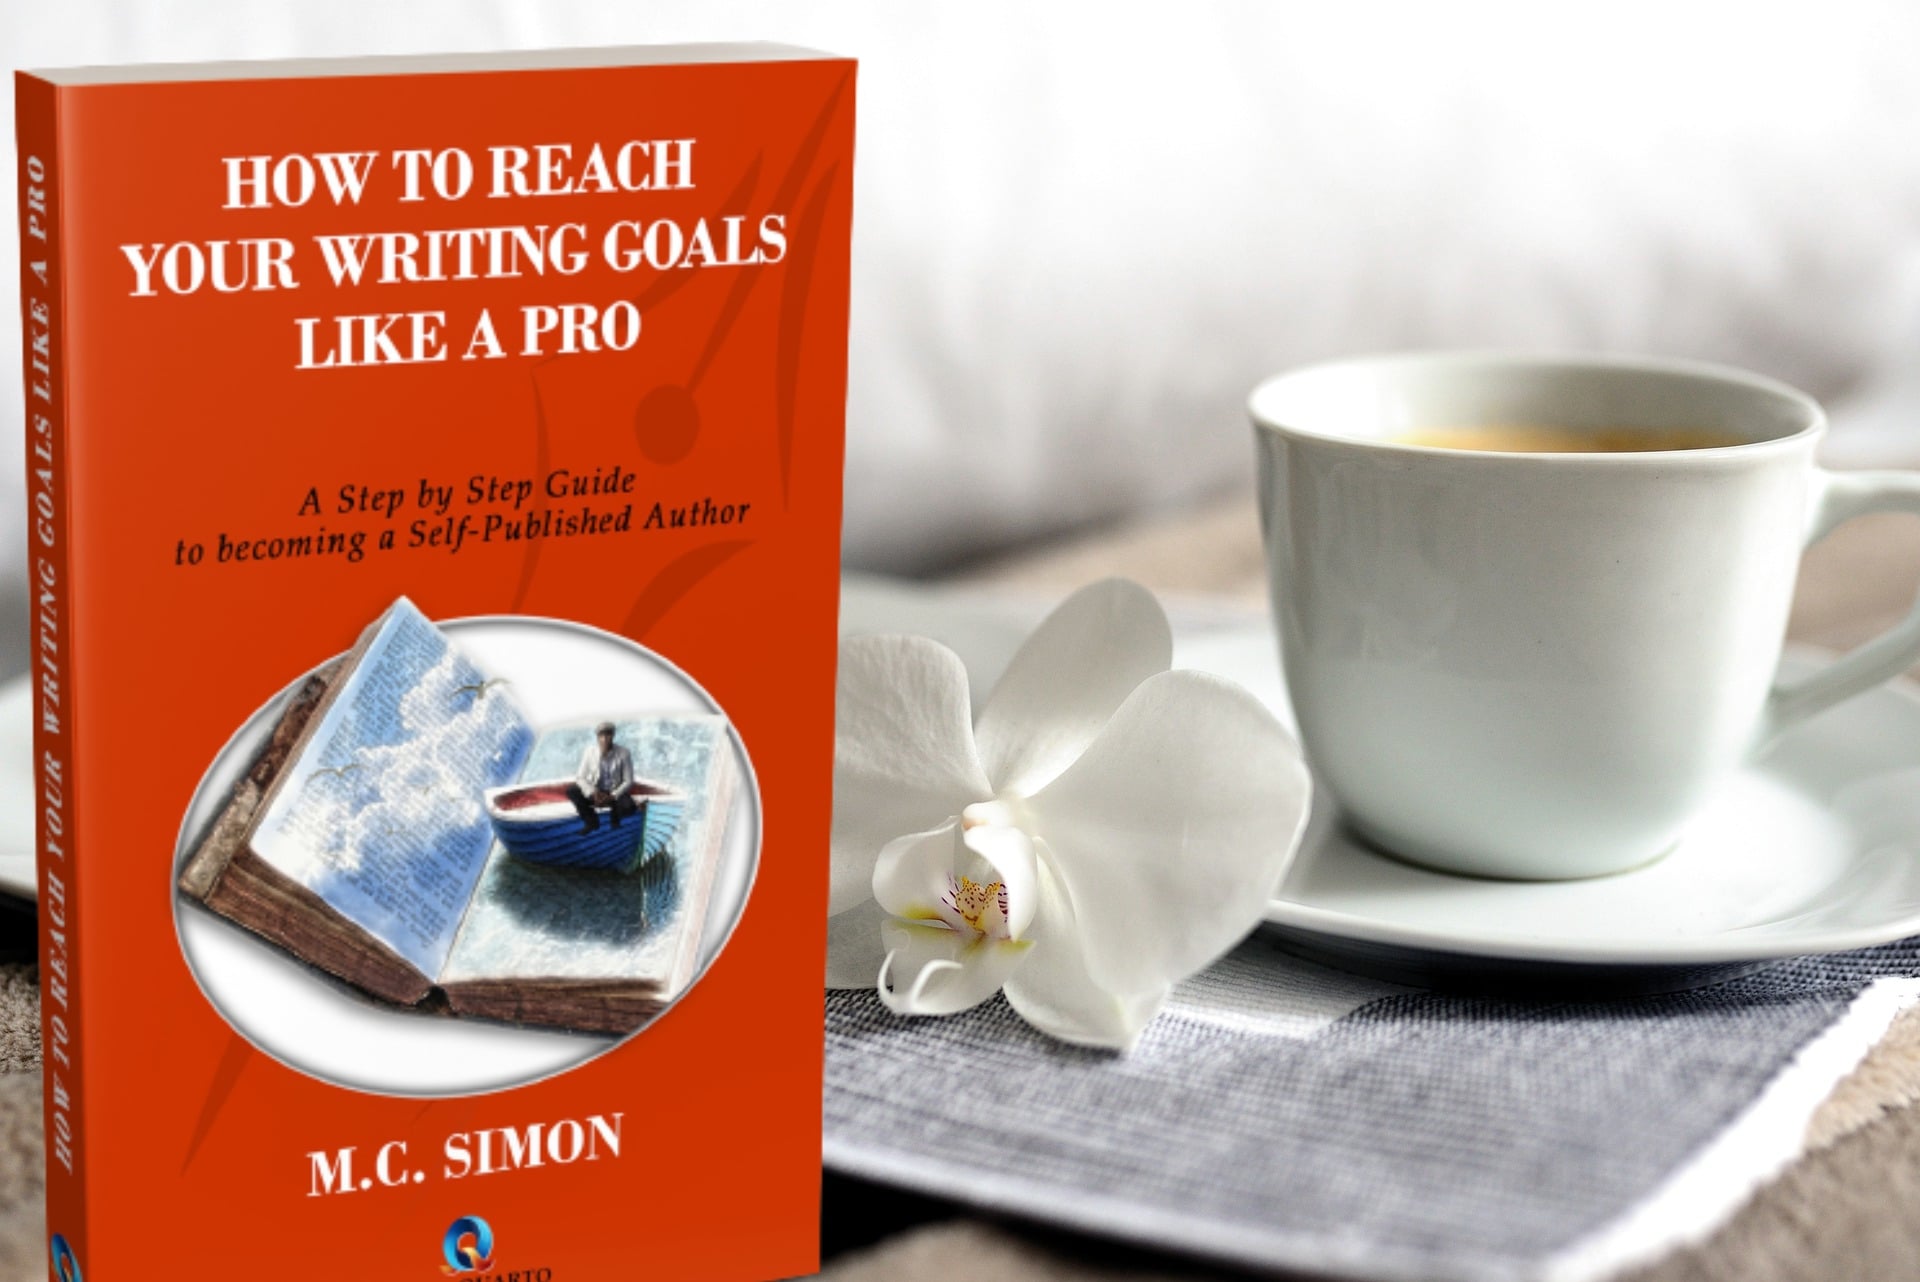 Recenzie In Romana How To Reach Your Writing Goals Like A Pro